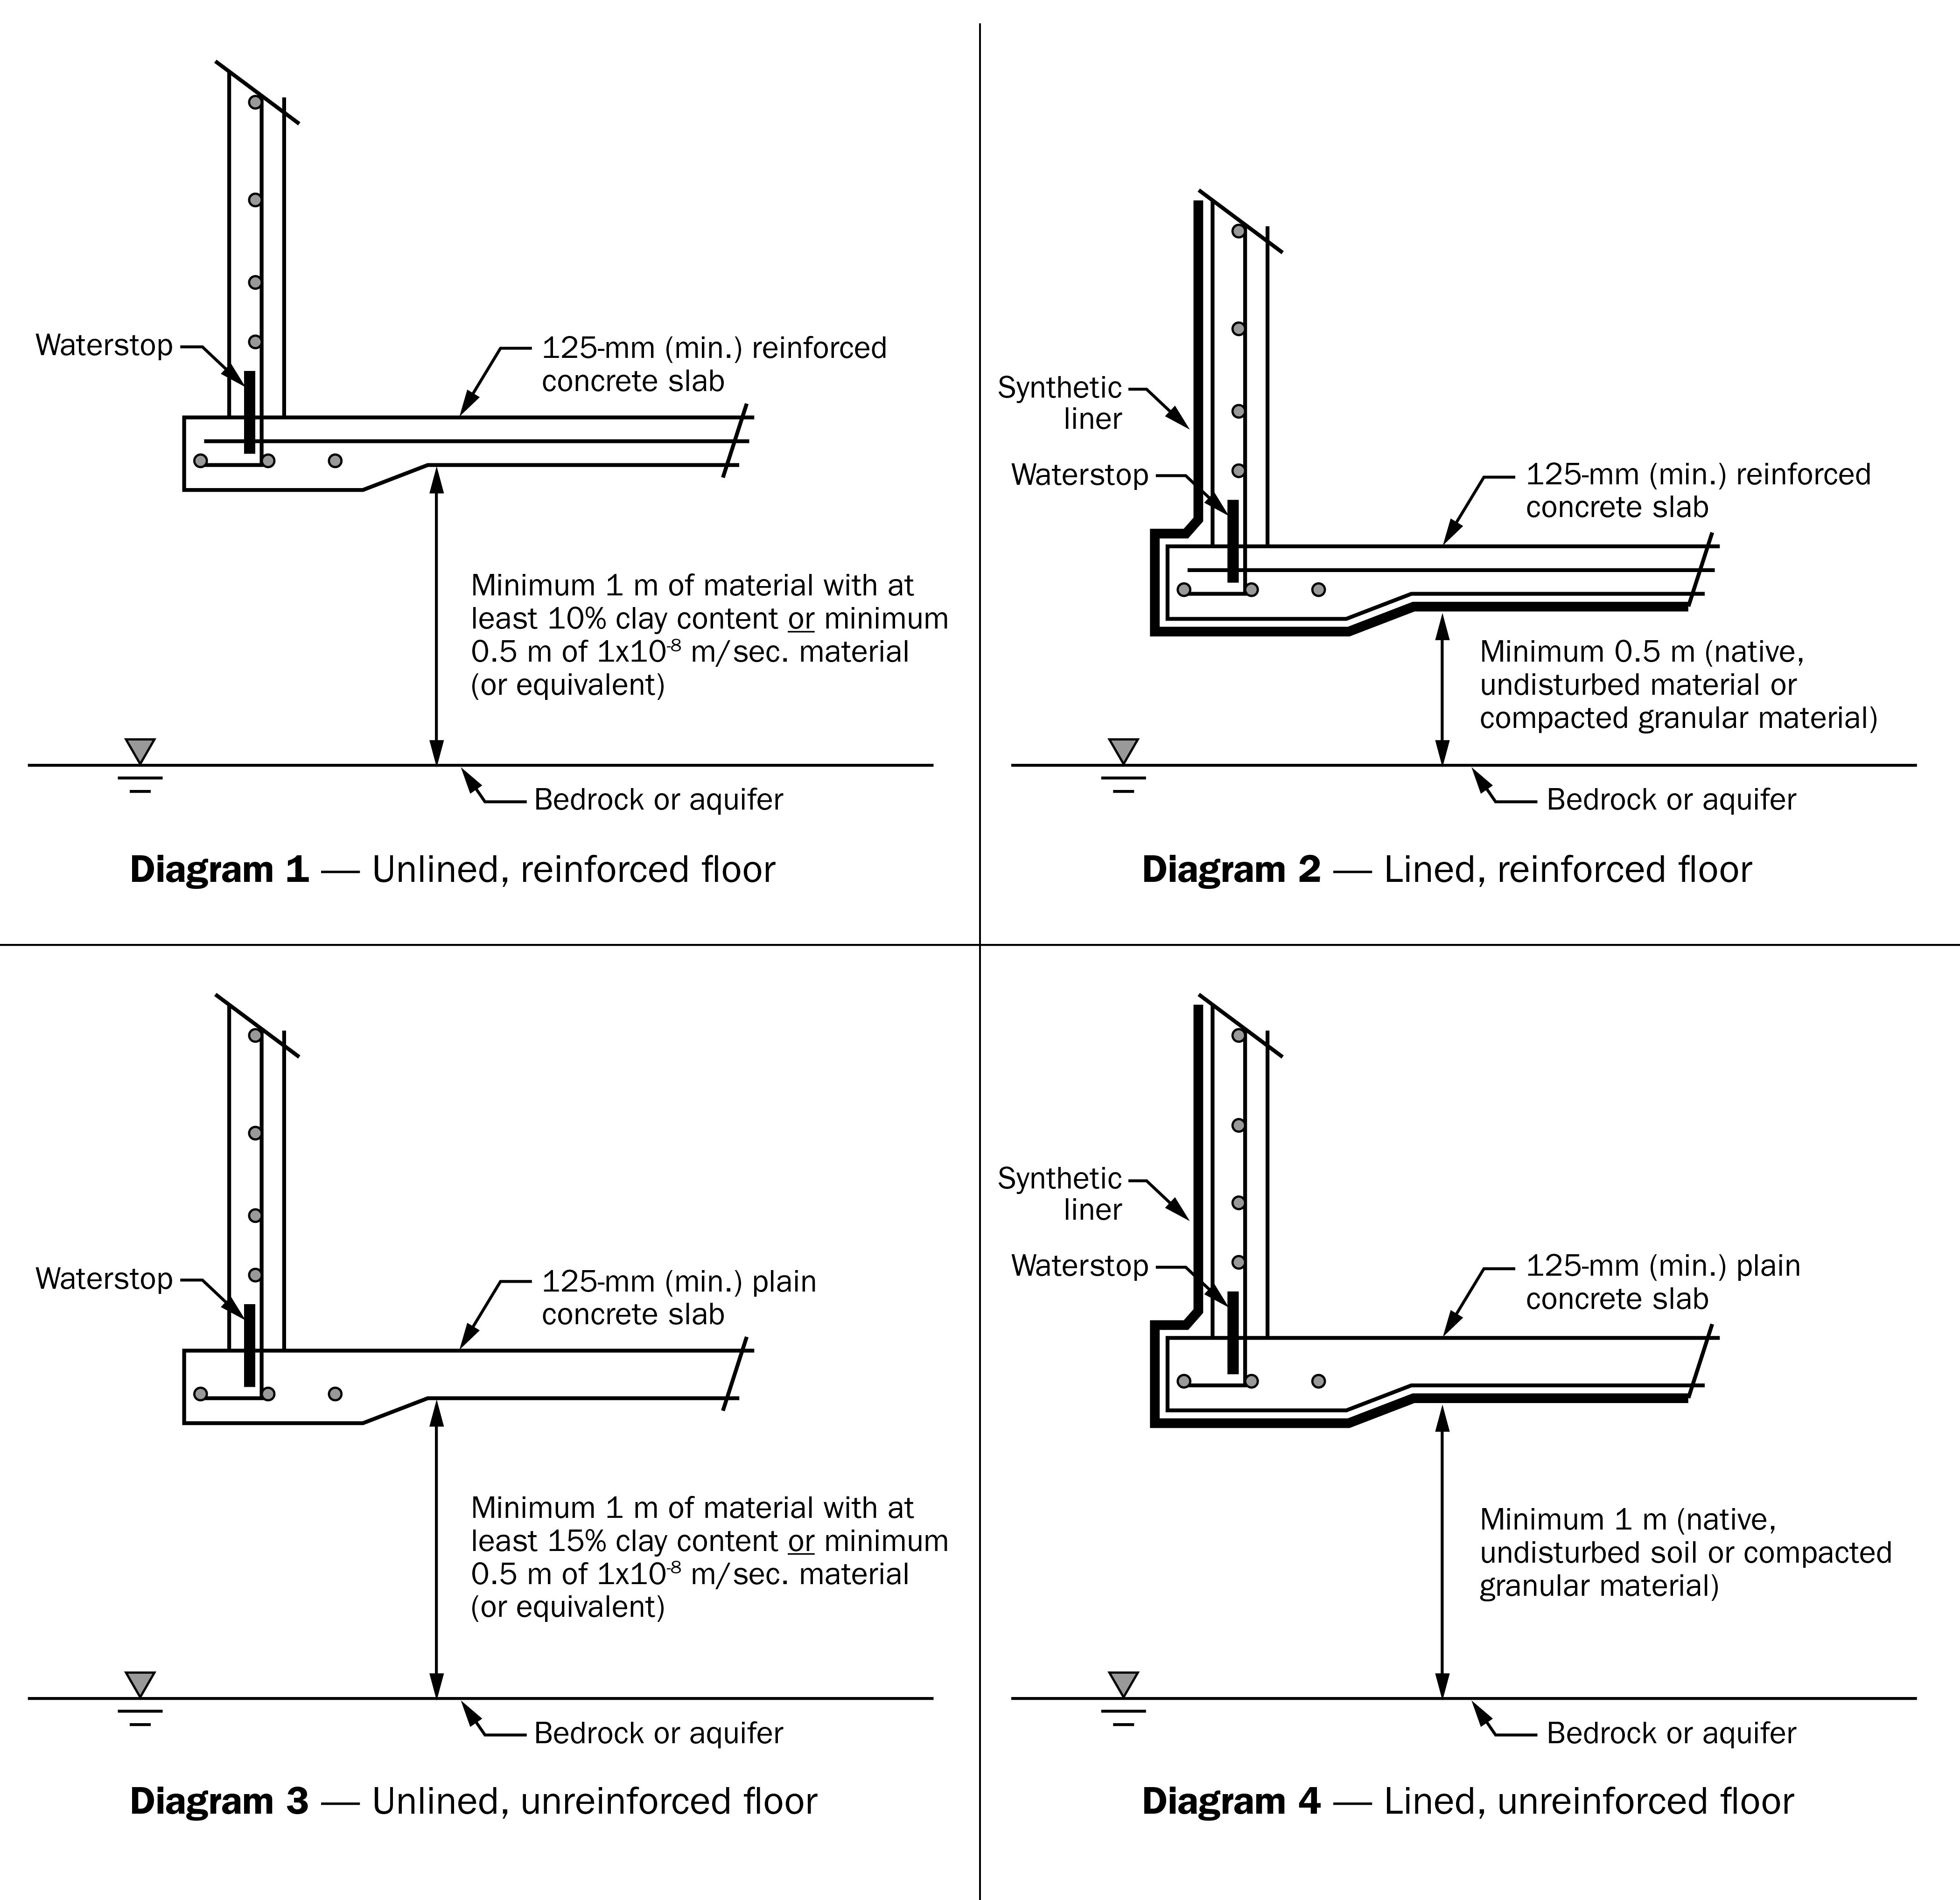 Four diagrams showing alternative structural systems that can be used for liquid nutrient storages.